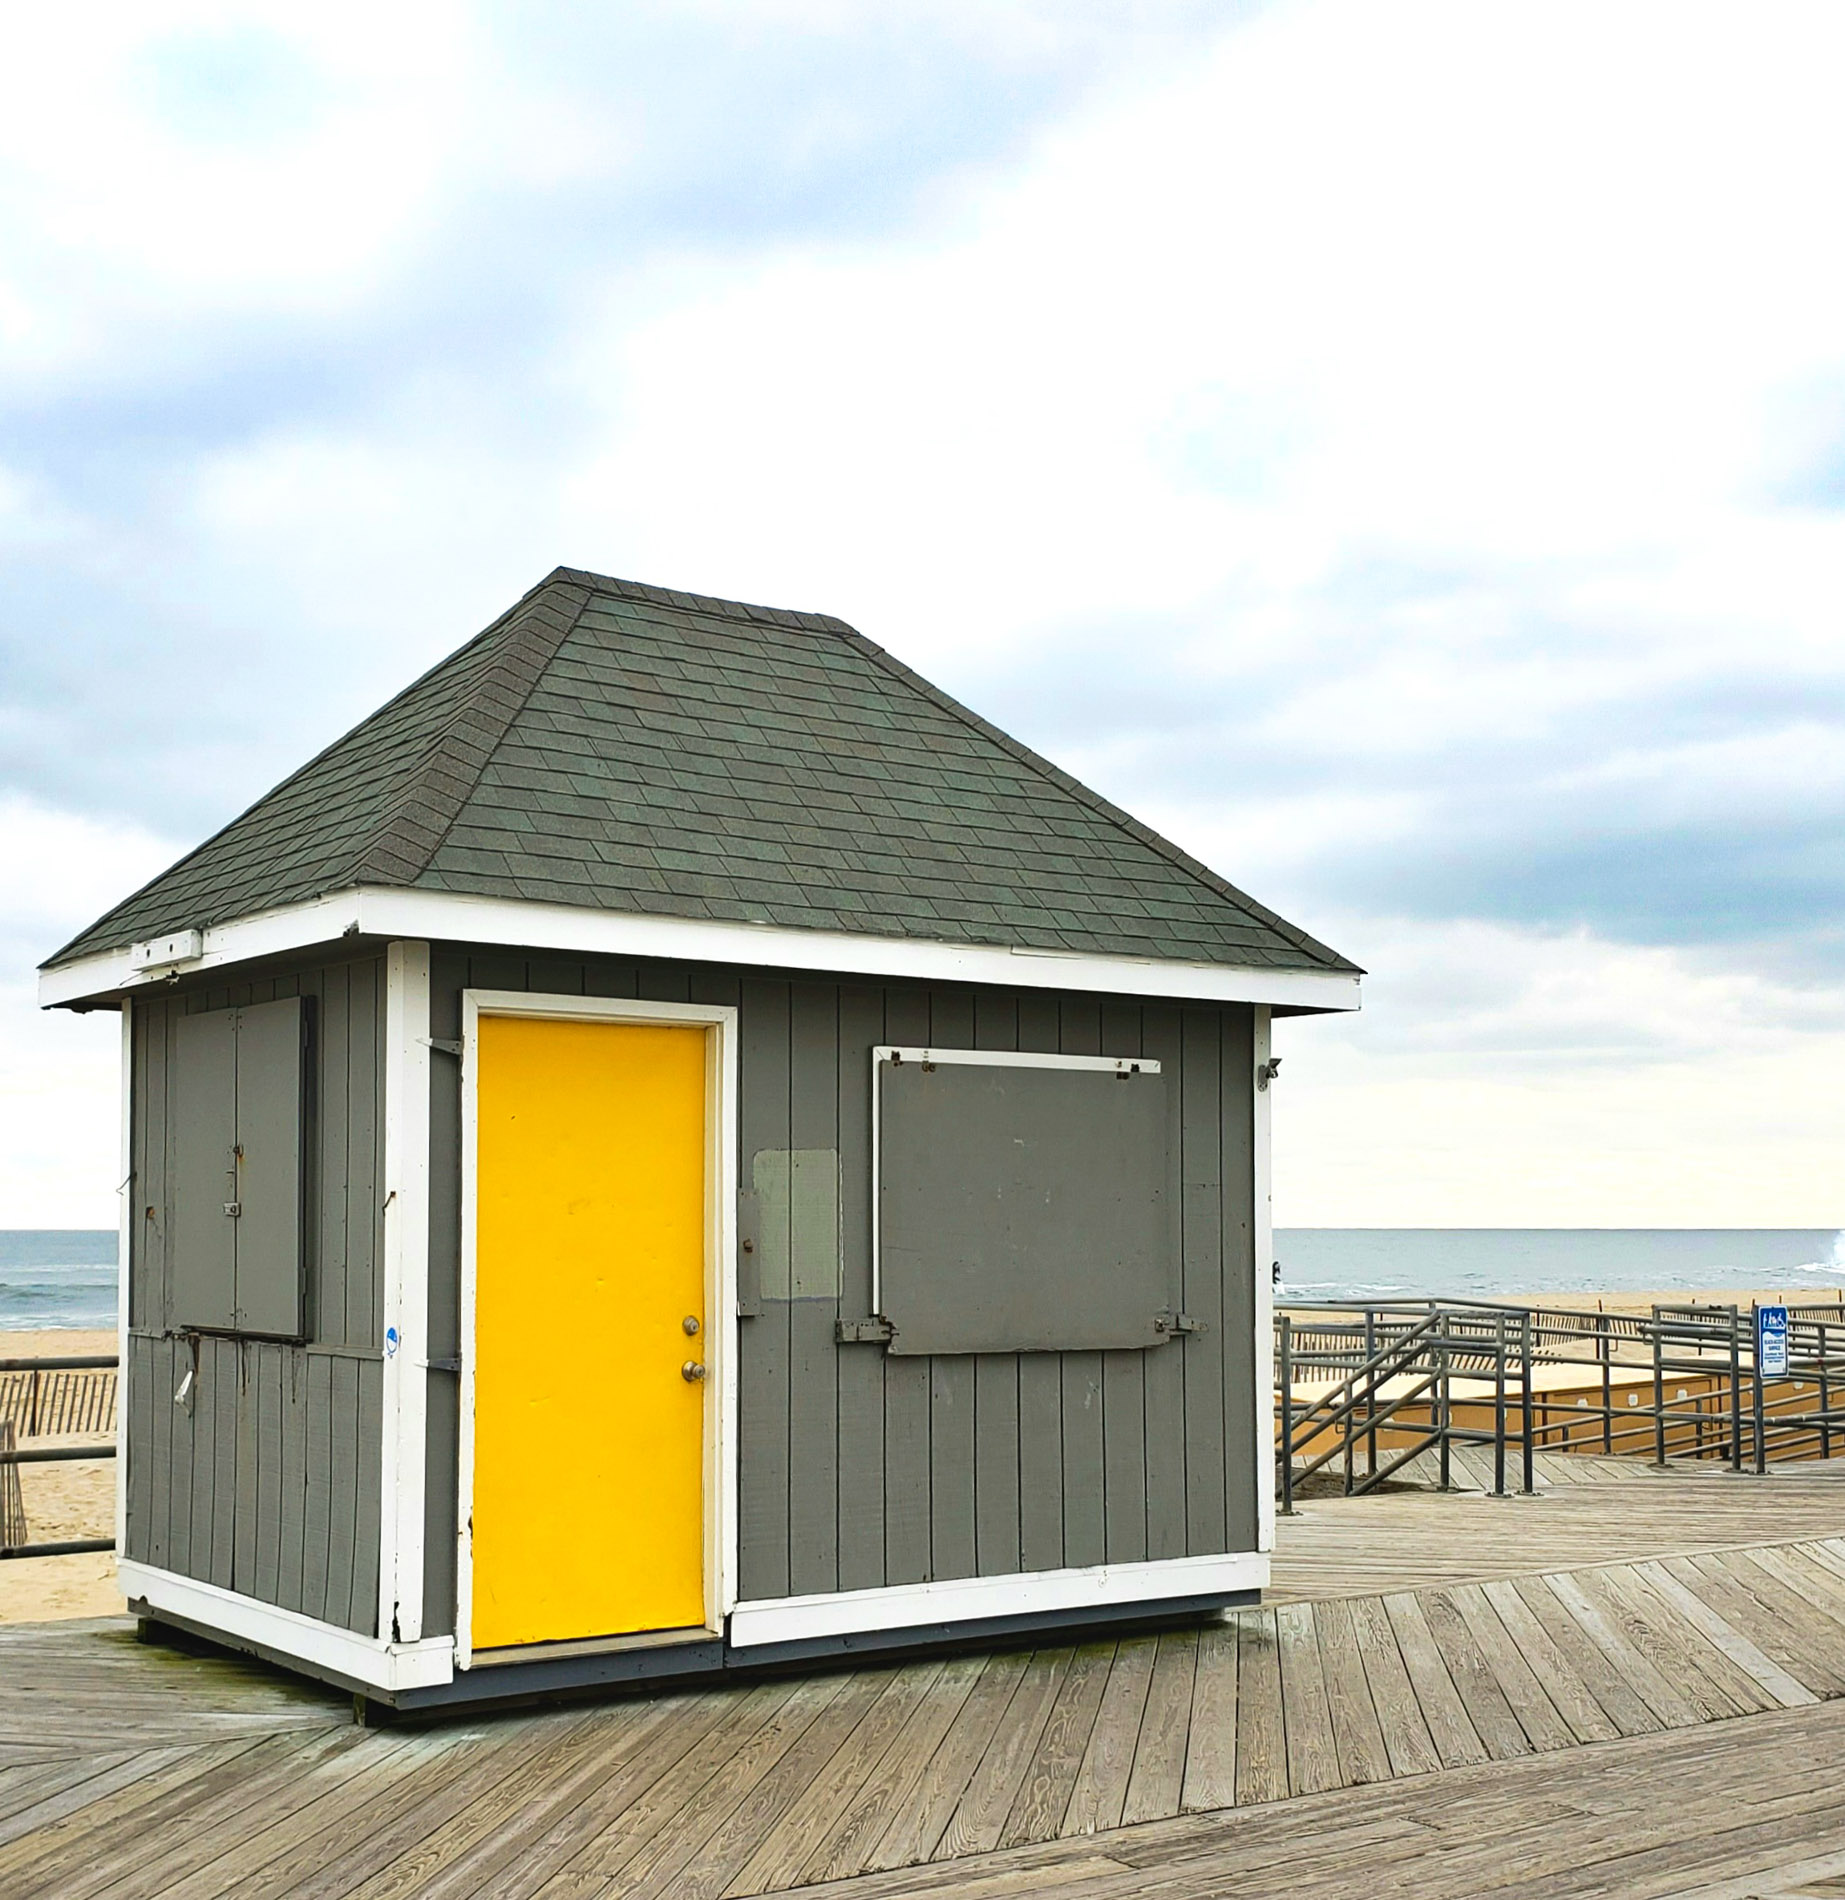 Grey shack with yellow door in front of ocean on partly cloudy day